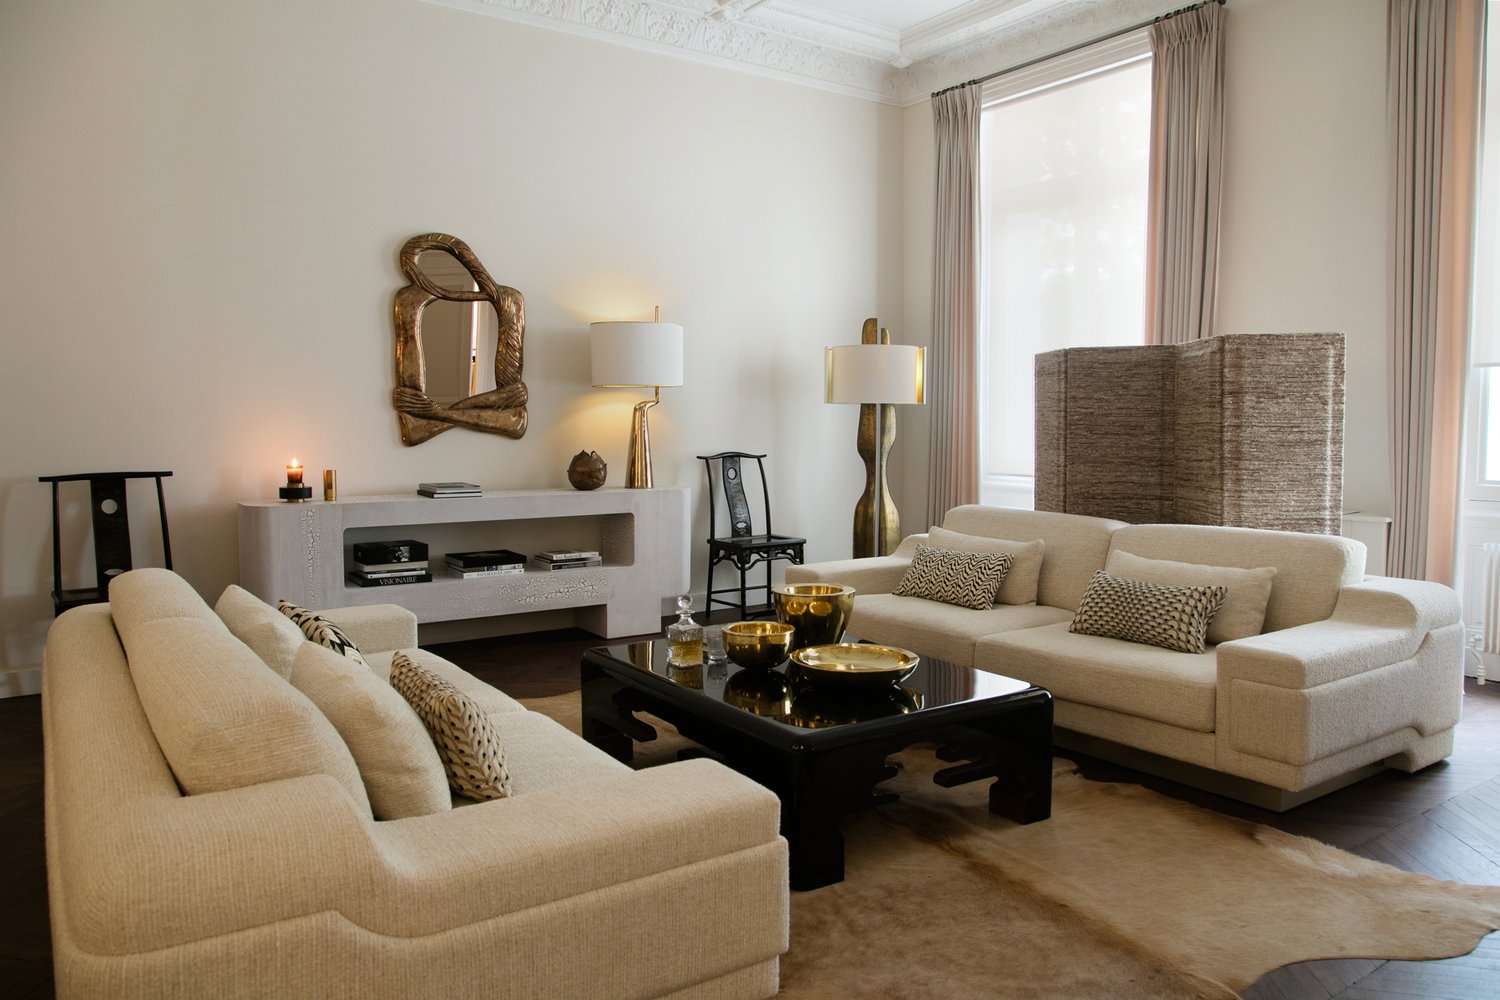 Modern comfortable living room with brass accents.